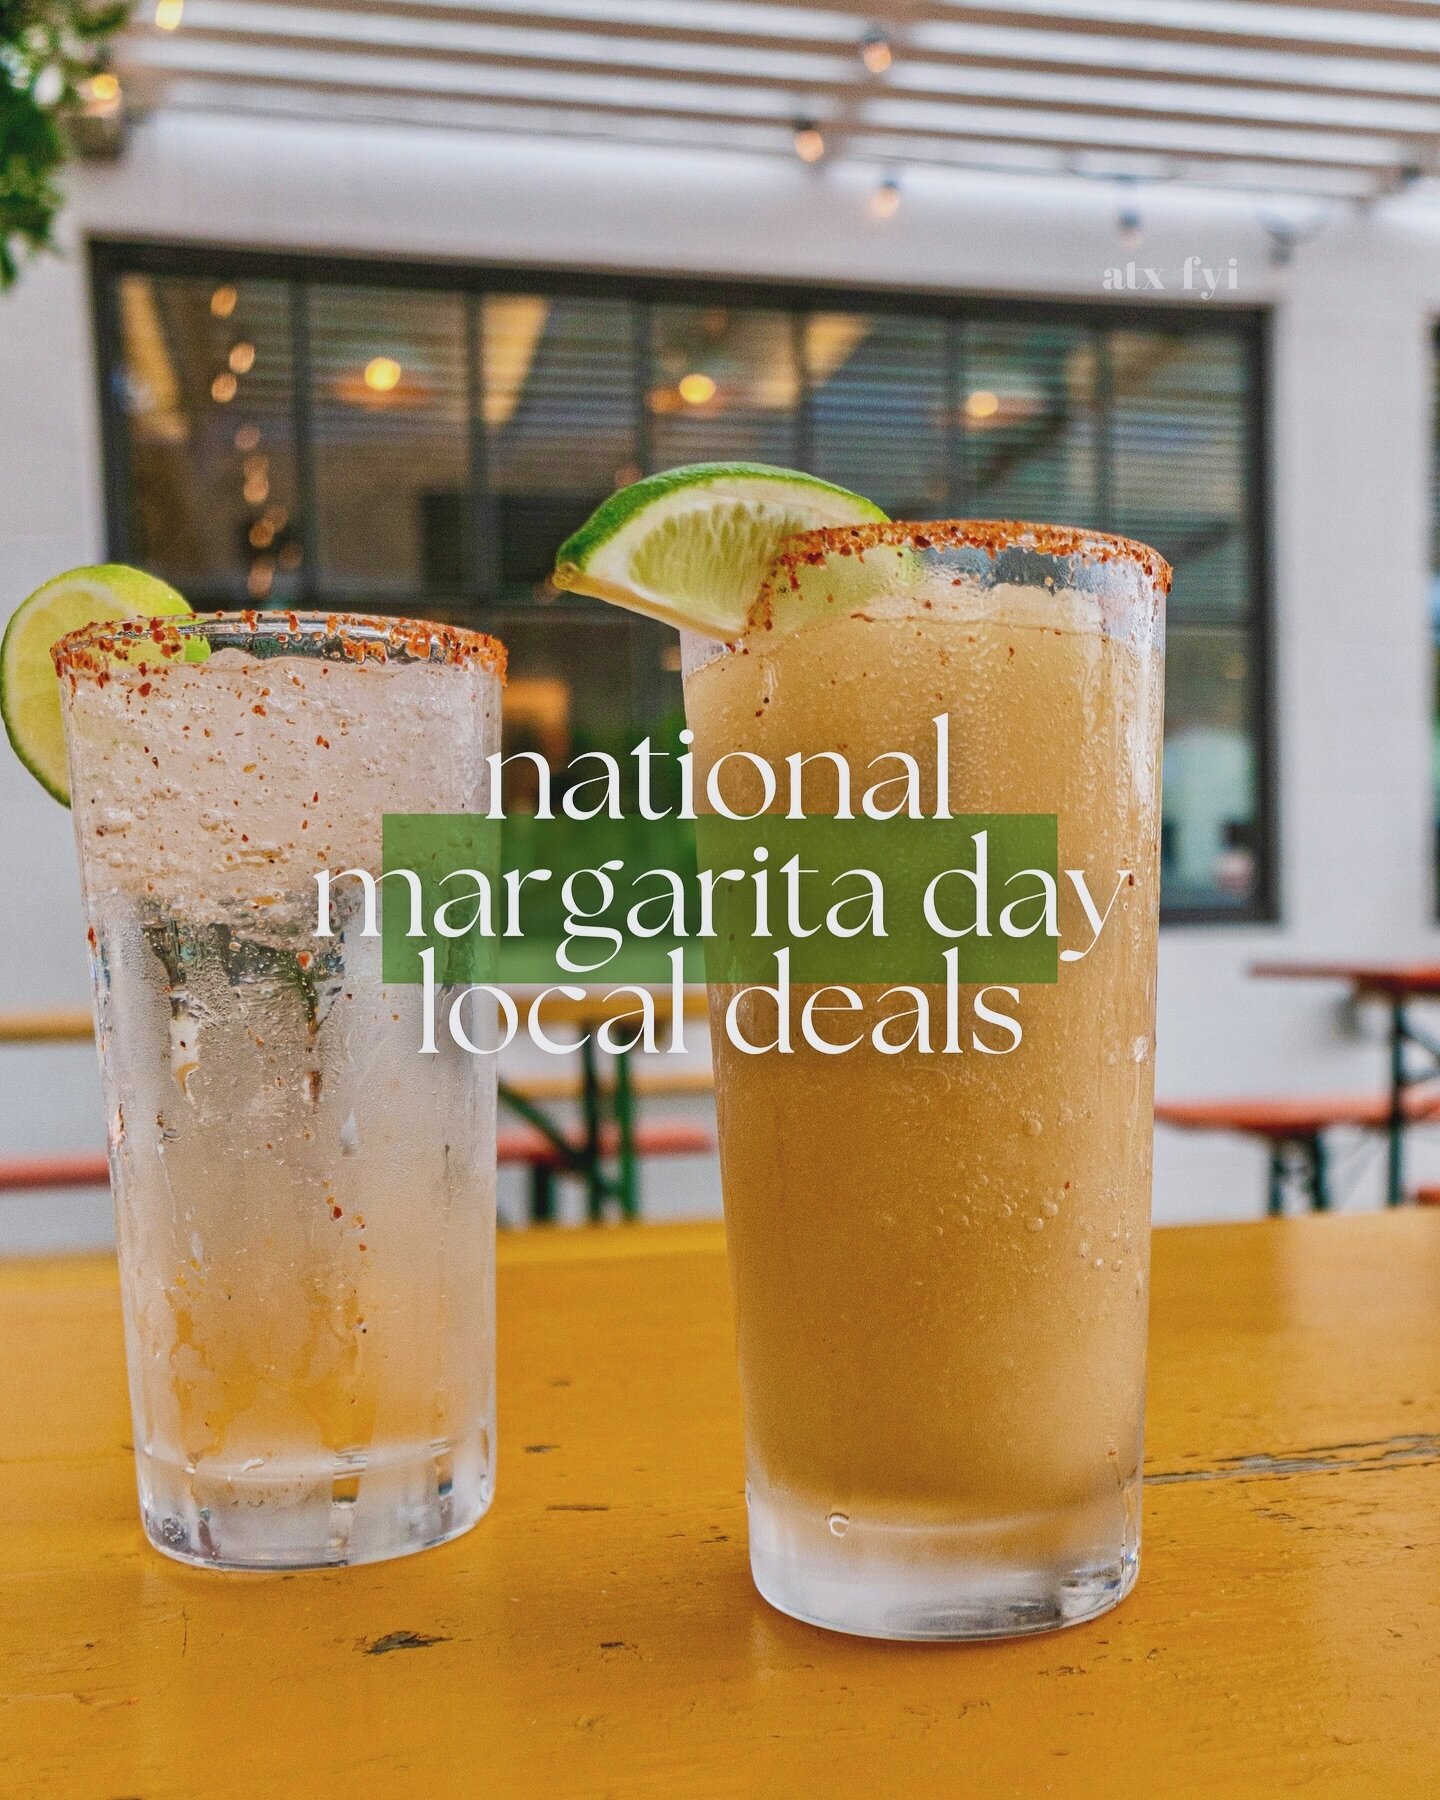 every day is national margarita day in atx

here are your deals around town to celebrate today!

🍹central austin 🍹
&bull; uncle nicky&rsquo;s | all day - $7 frozen italian rita (&amp; $5 2-5pm)

🍹east austin 🍹
&bull; el chile cafe | all day - $6 